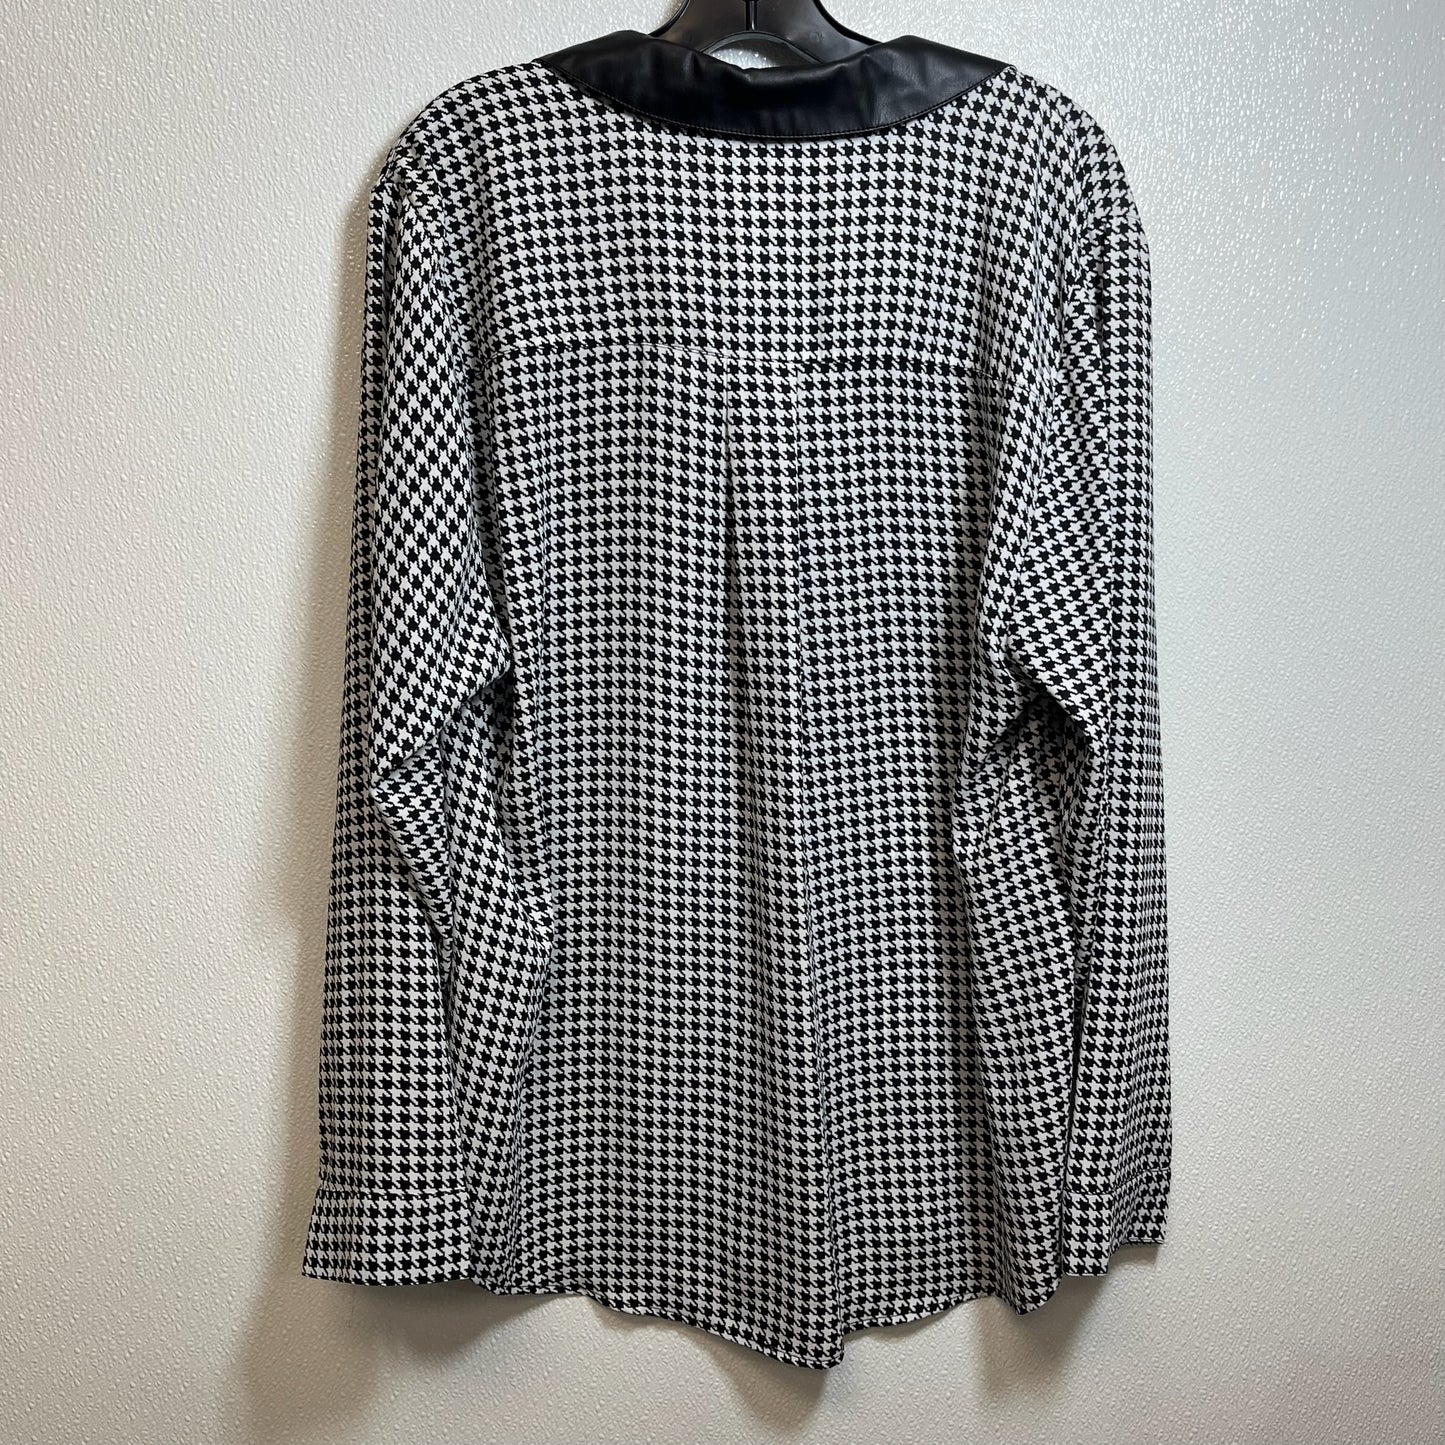 Blouse Long Sleeve By Torrid  Size: 2x